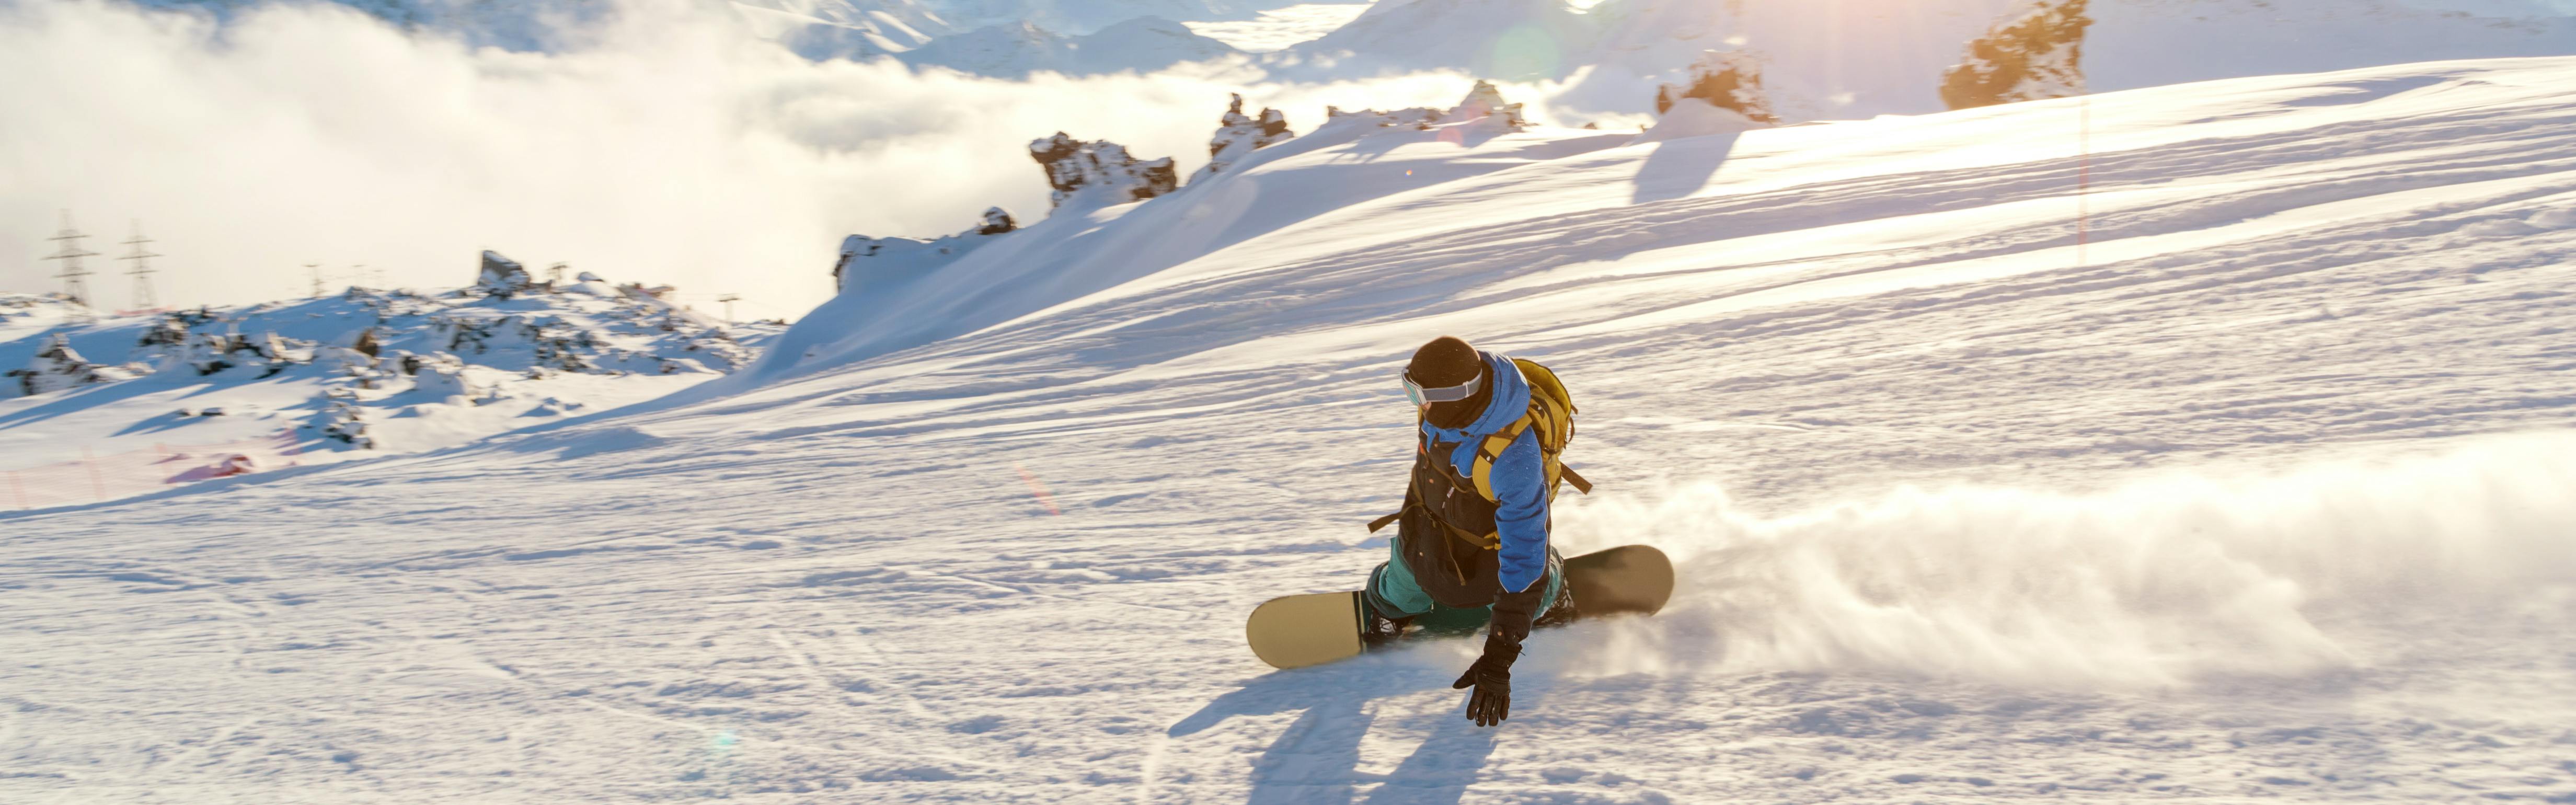 An Expert Guide to Bataleon Snowboards